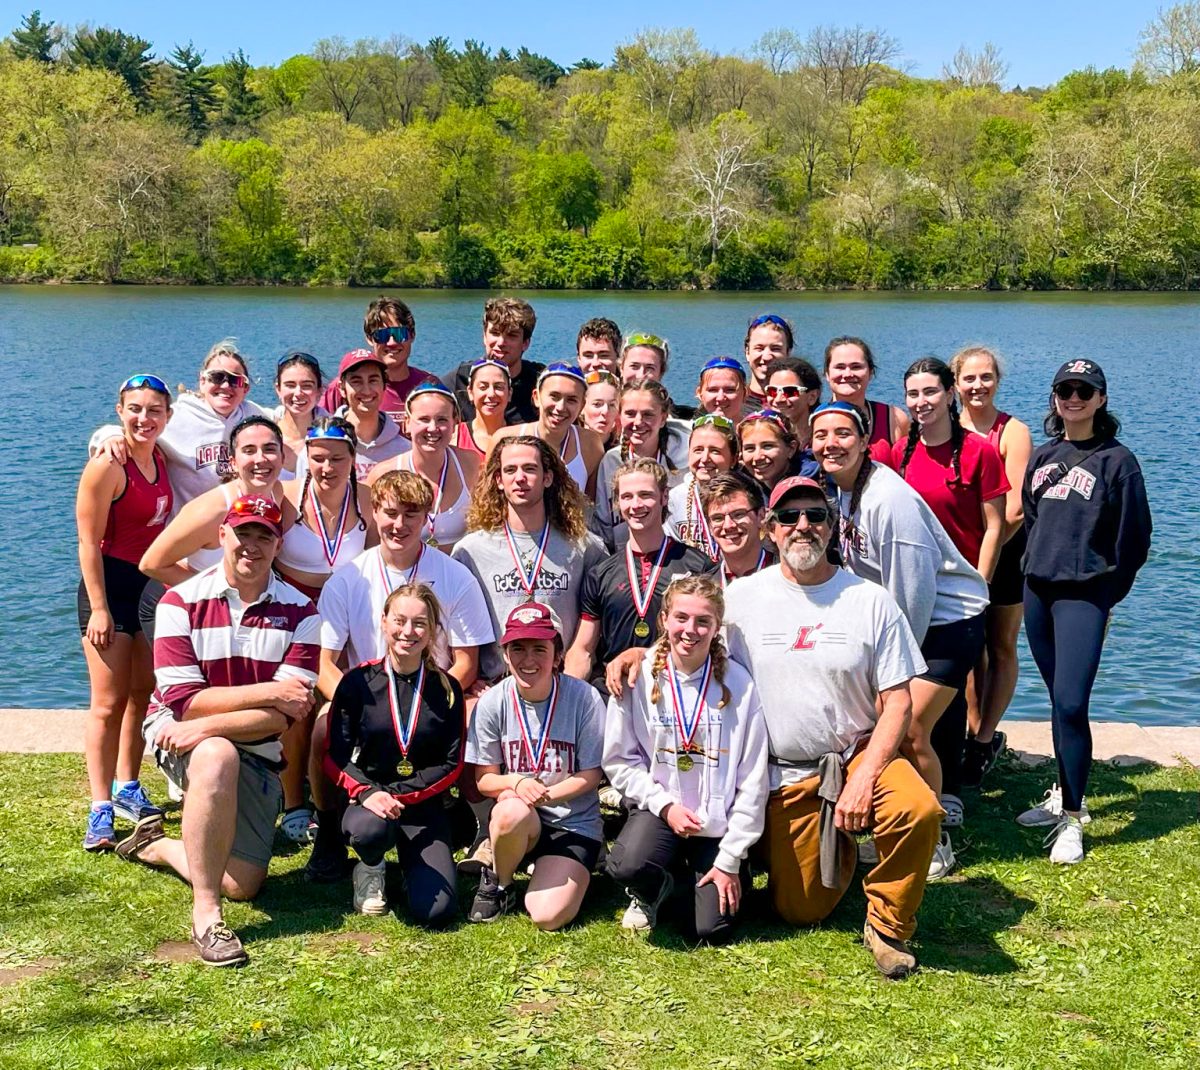 The crew team poses after putting in a stellar performance at the Kerr Cup. (Photo courtesy of @lafcrew on Instagram)